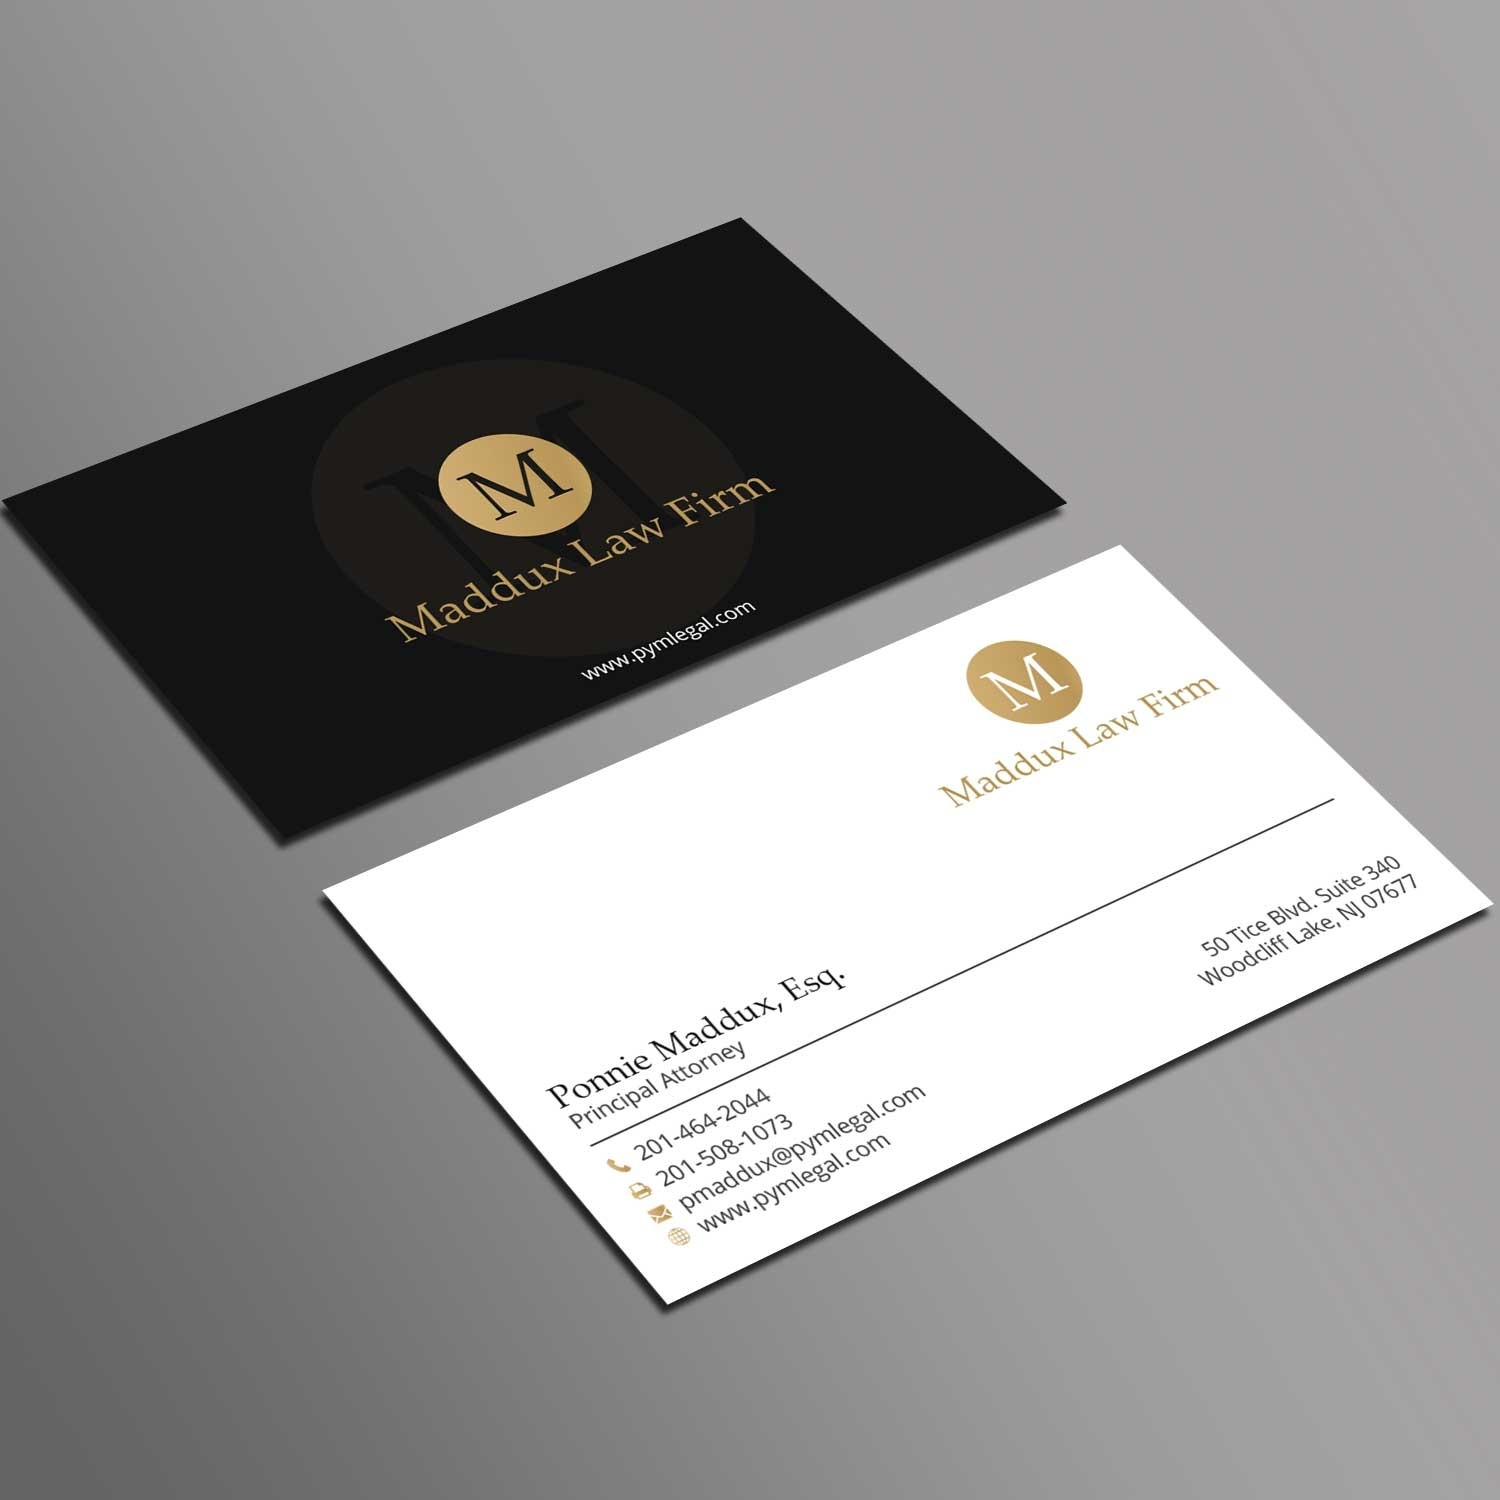 Cool attorney Business Cards Samples solo Kit Of attorney Business Card Template